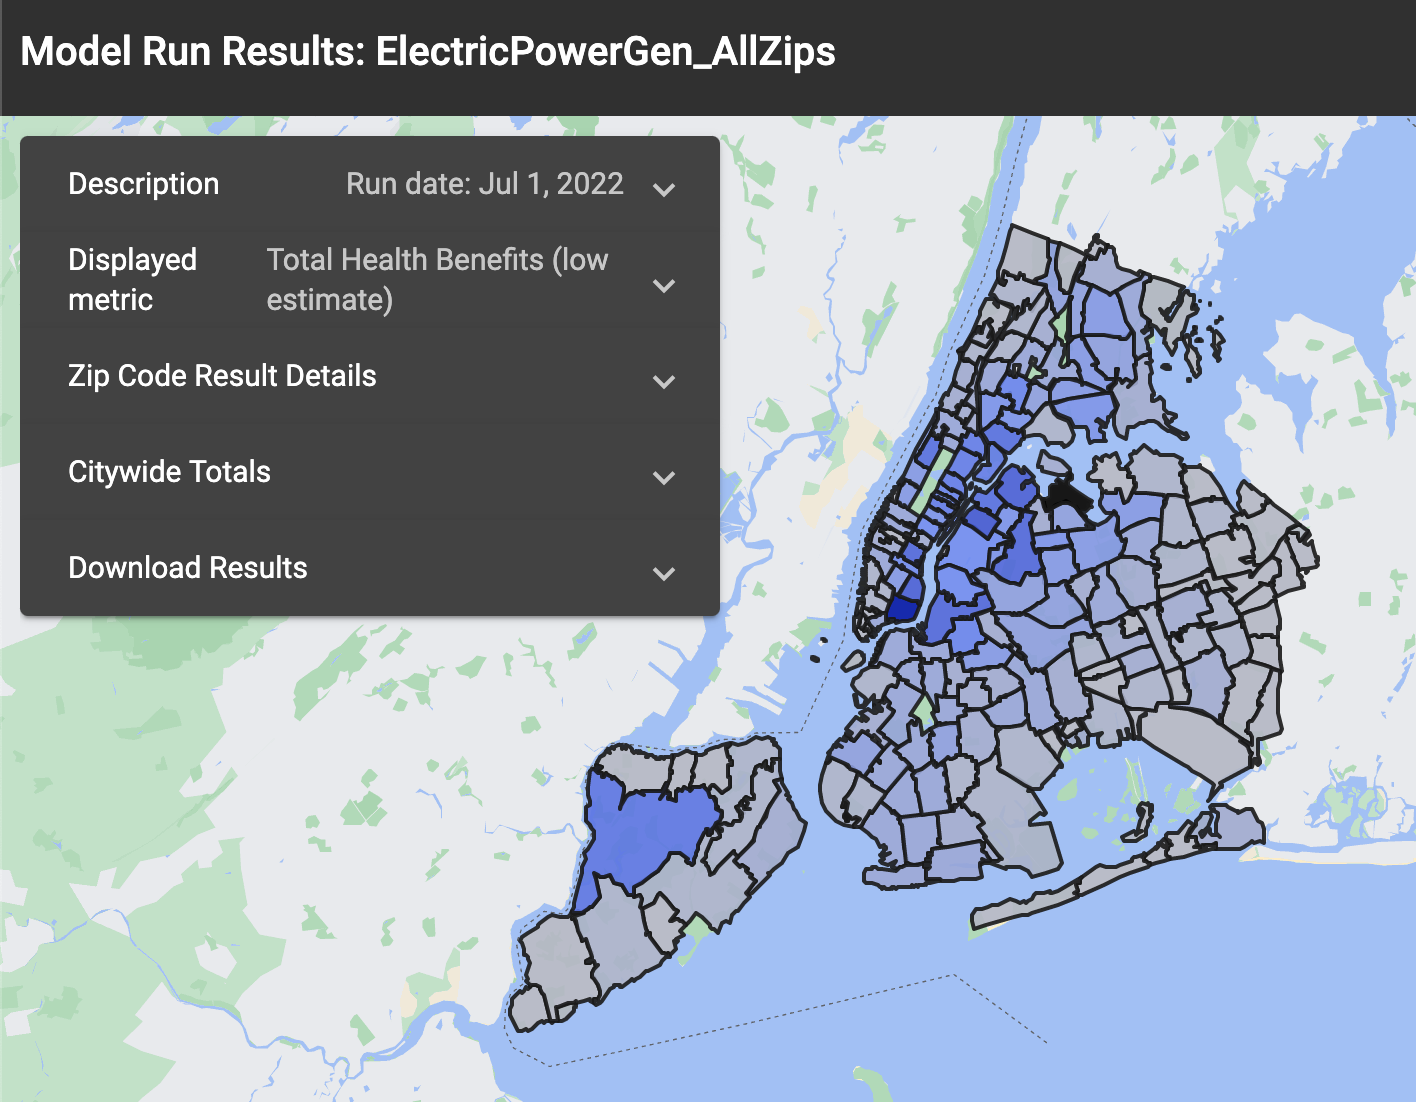 Image of Model run results for: Electric_Power_Generation_All_Zips. The dropdown menu notes the description, displayed metric (total health benefits), ZIP Code result details, citywide totals, and download results. The map of NYC has all ZIP Codes outlined in black with varying shades of blue.